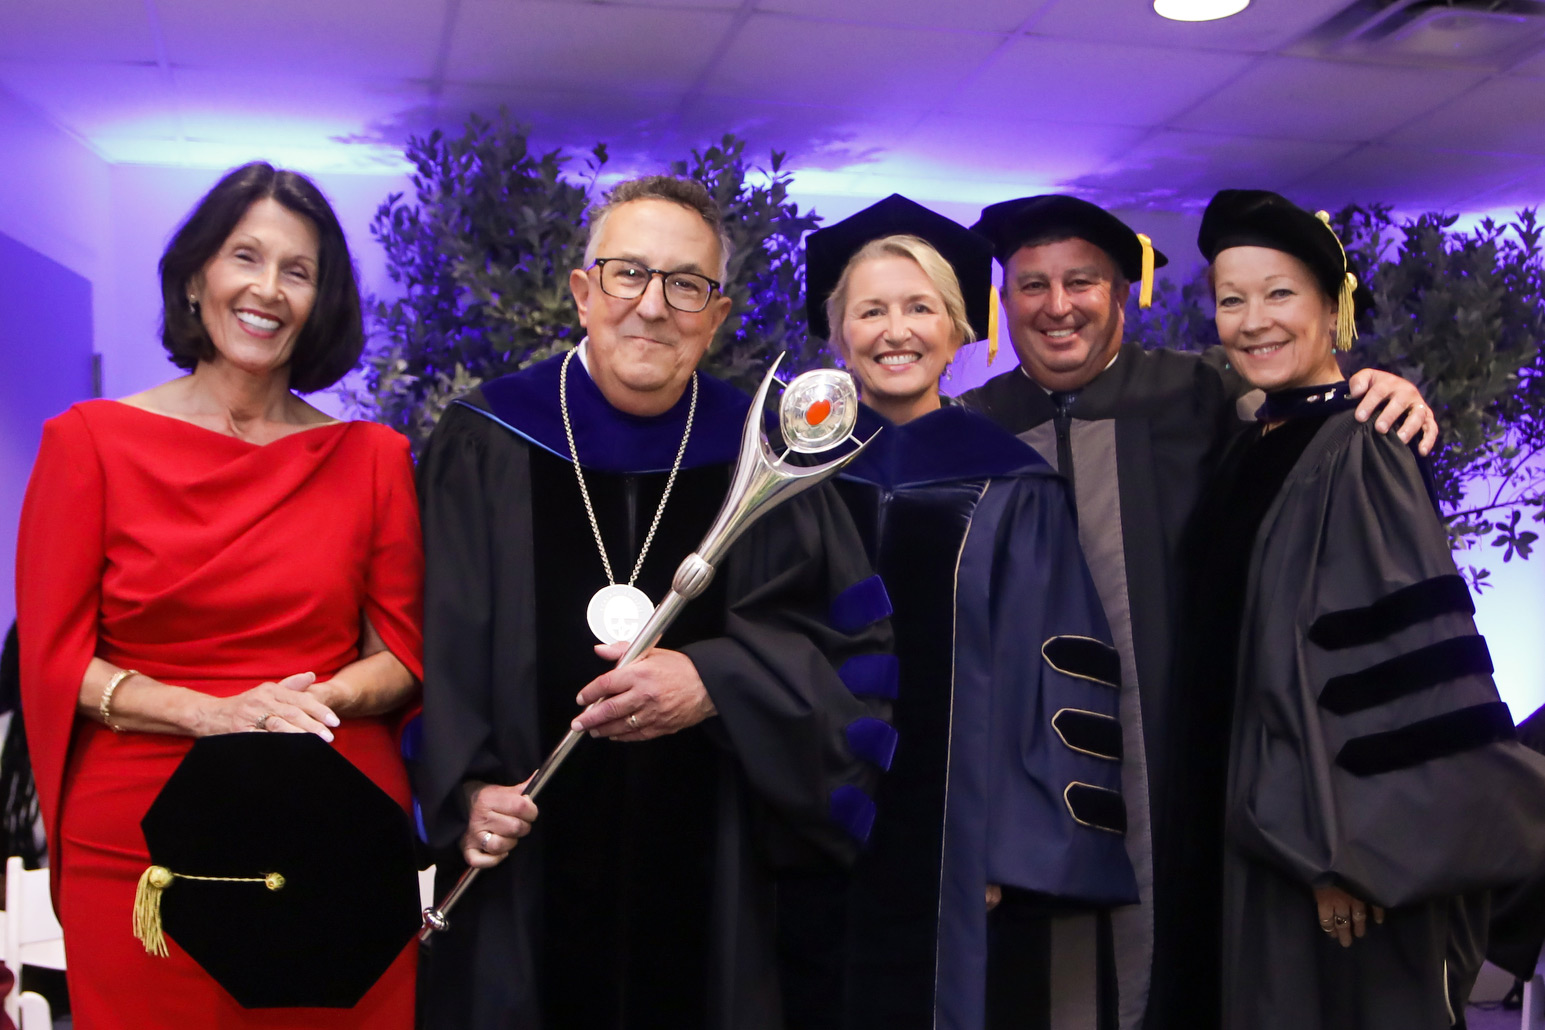 Annarelli holds mace on stage alongside his wife, two trustees and faculty member dressed in regalia